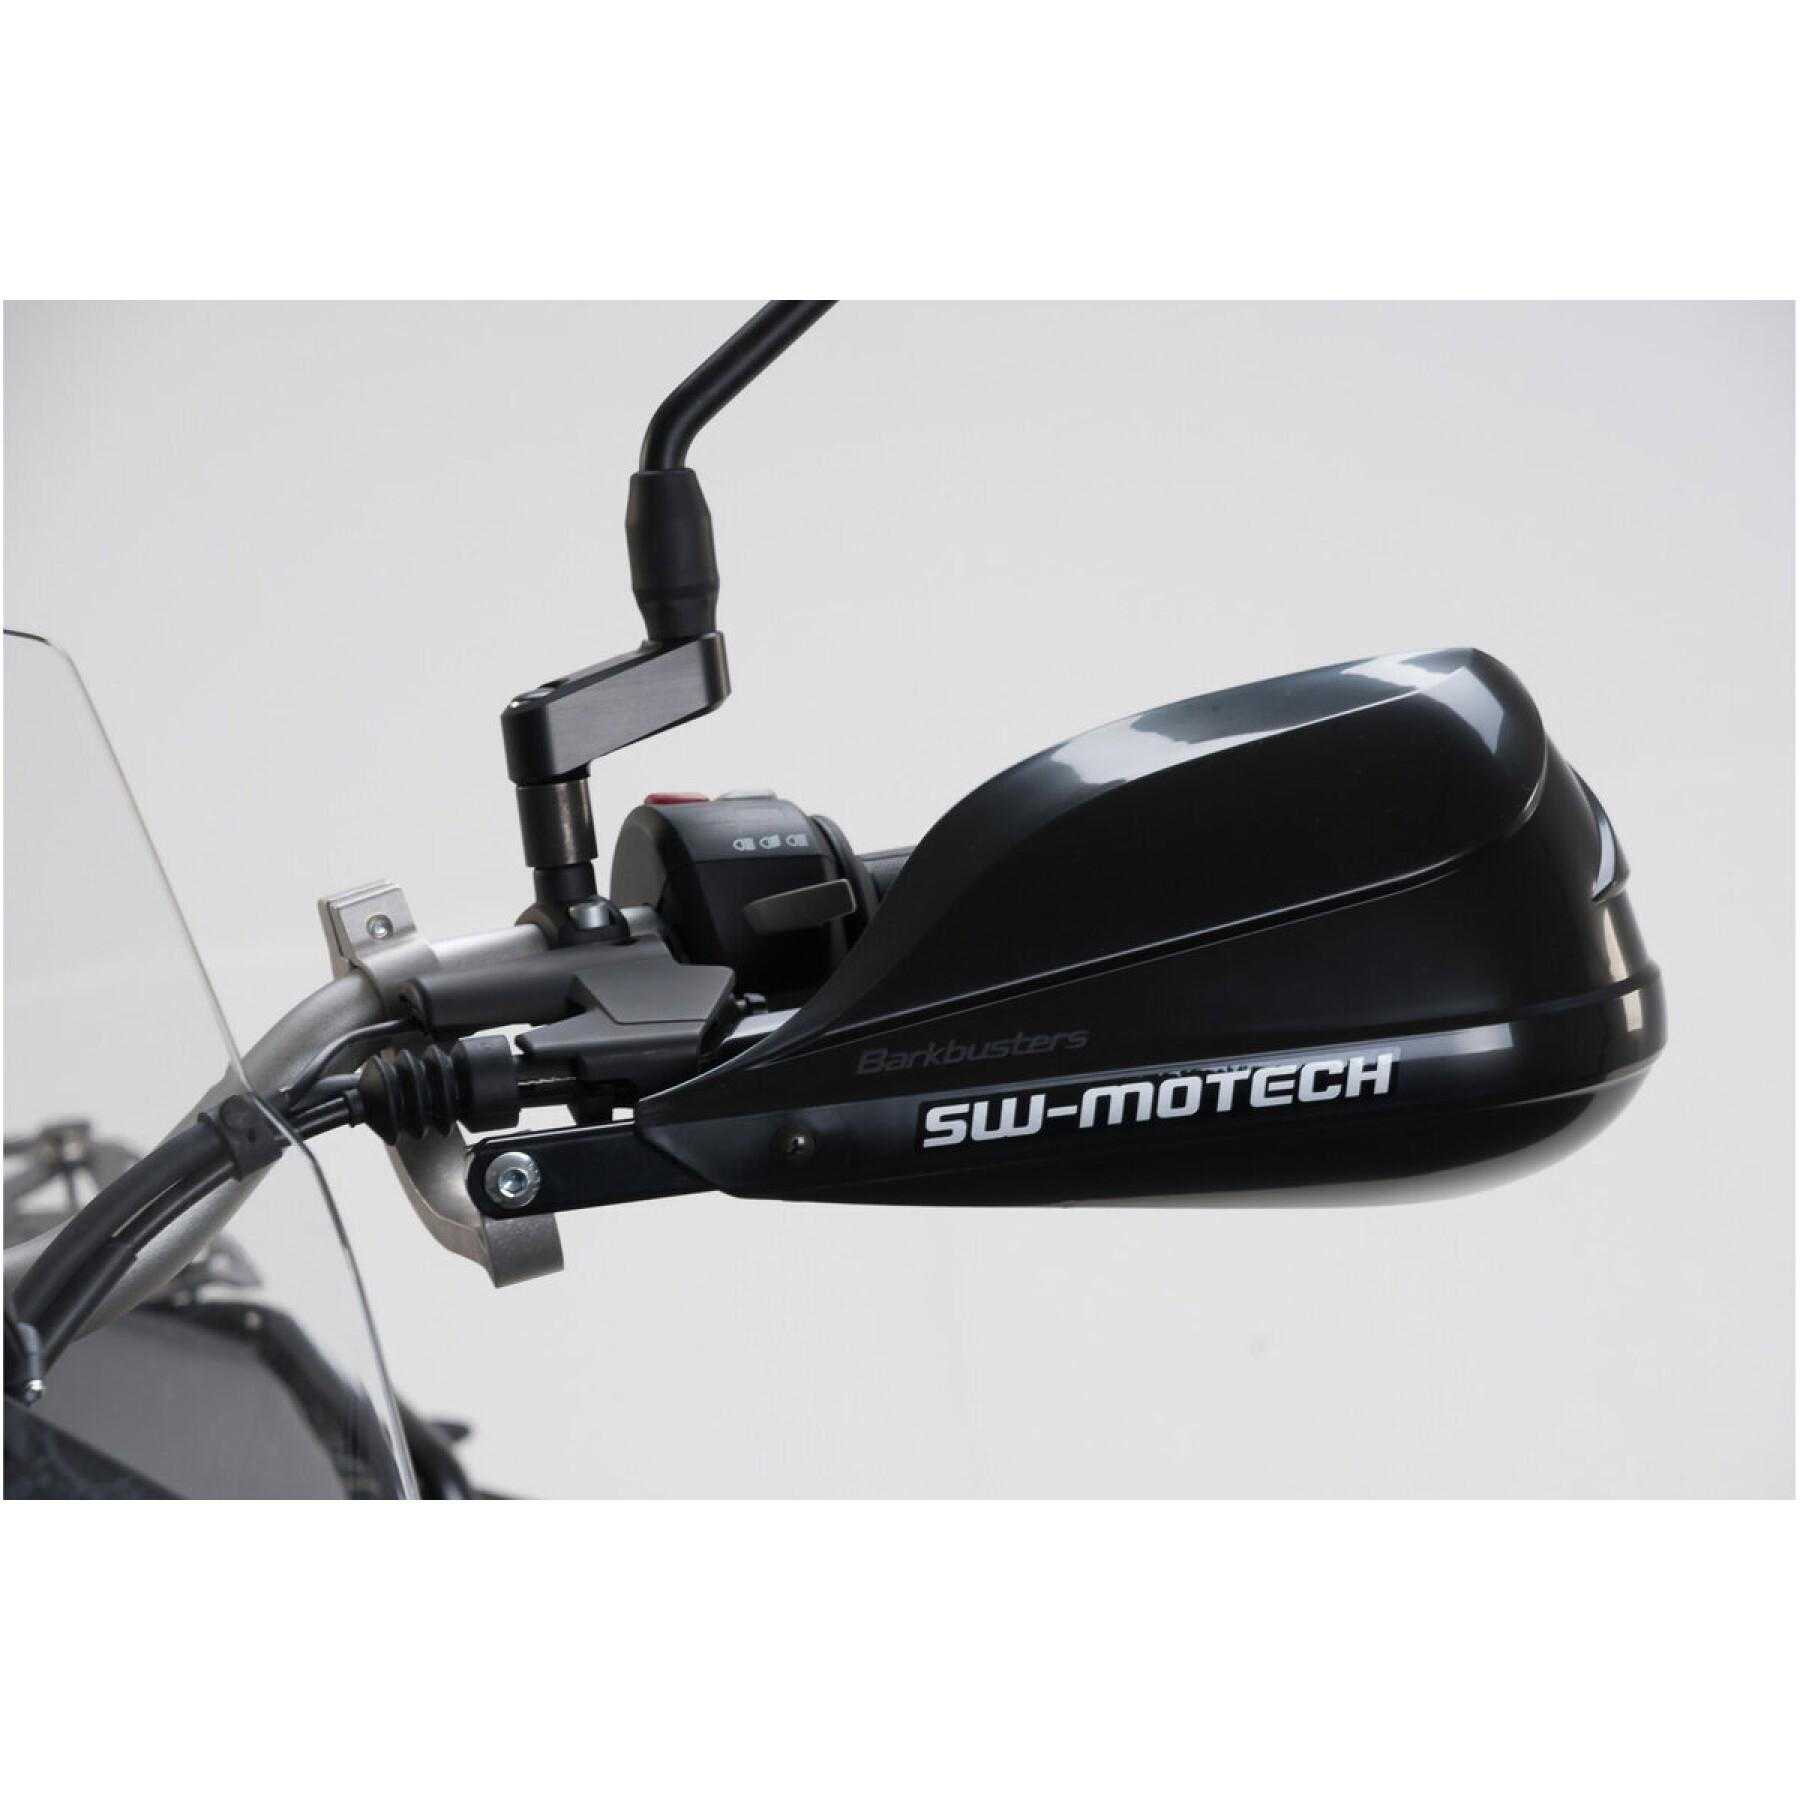 Handguard kit for all motorcycles SW-Motech Bbstorm